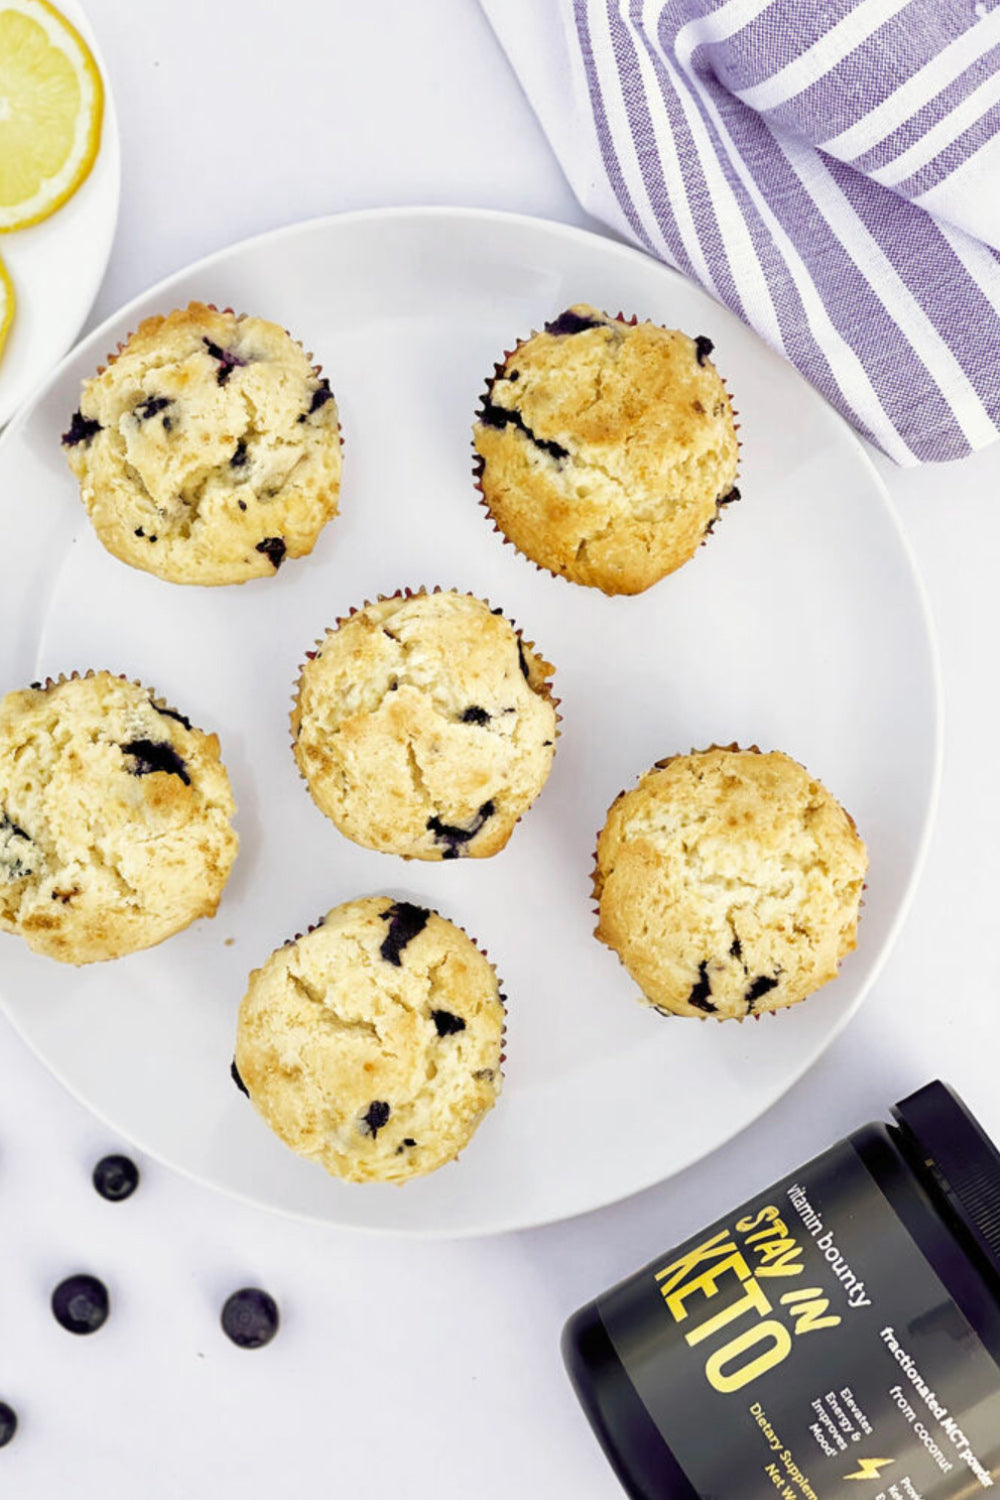  Blueberry Lemon Muffins made with Stay in Keto Powder from Vitamin Bounty